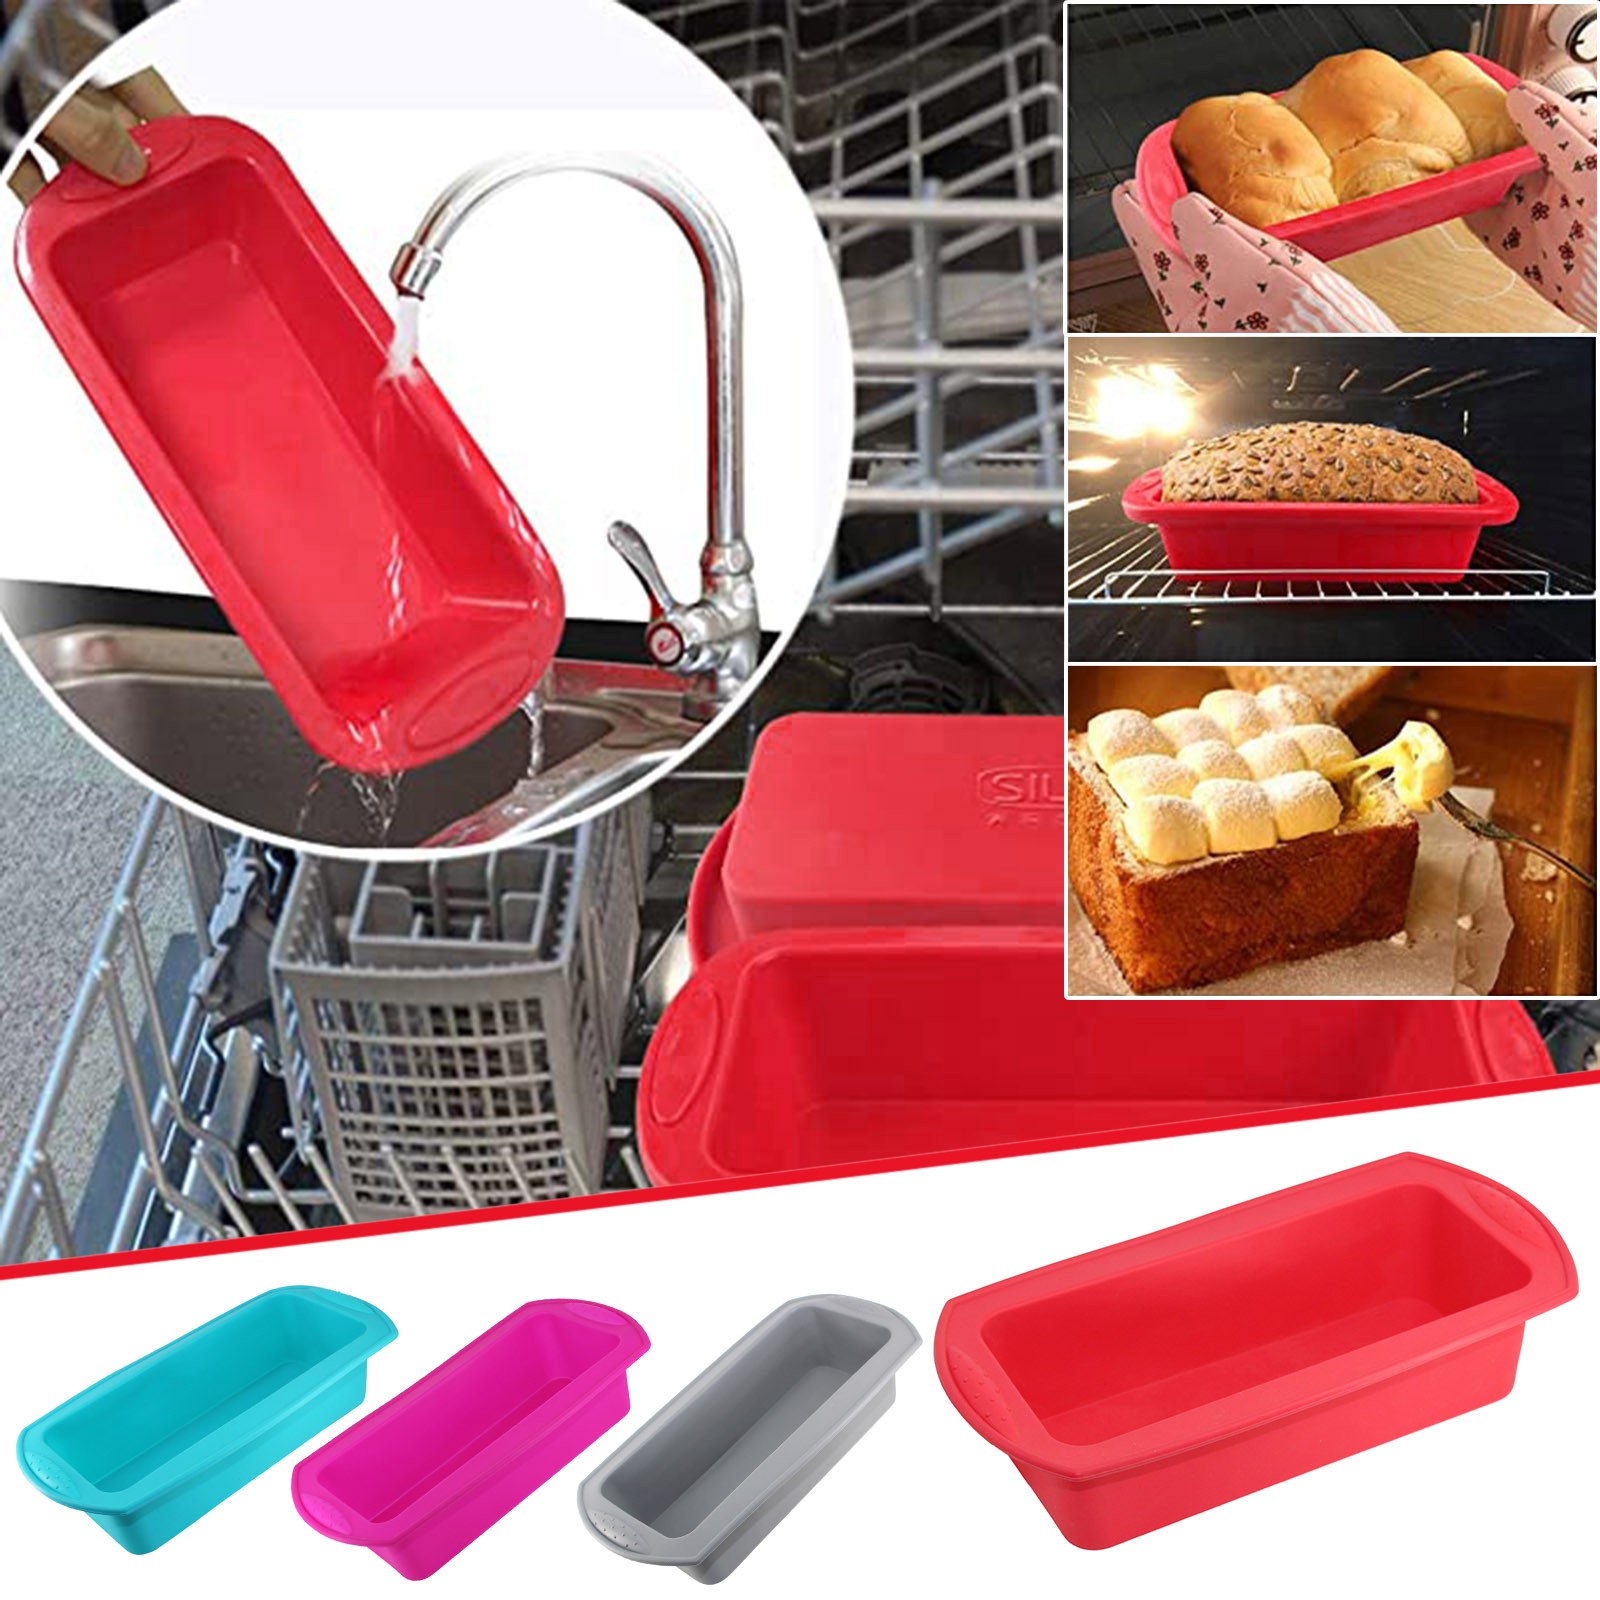 1PC Silicone Cake Mold Pan Muffin Chocolate Pizza Baking Tray Mould for Baking Sponge Chiffon Mousse Kitchen Cake Mold